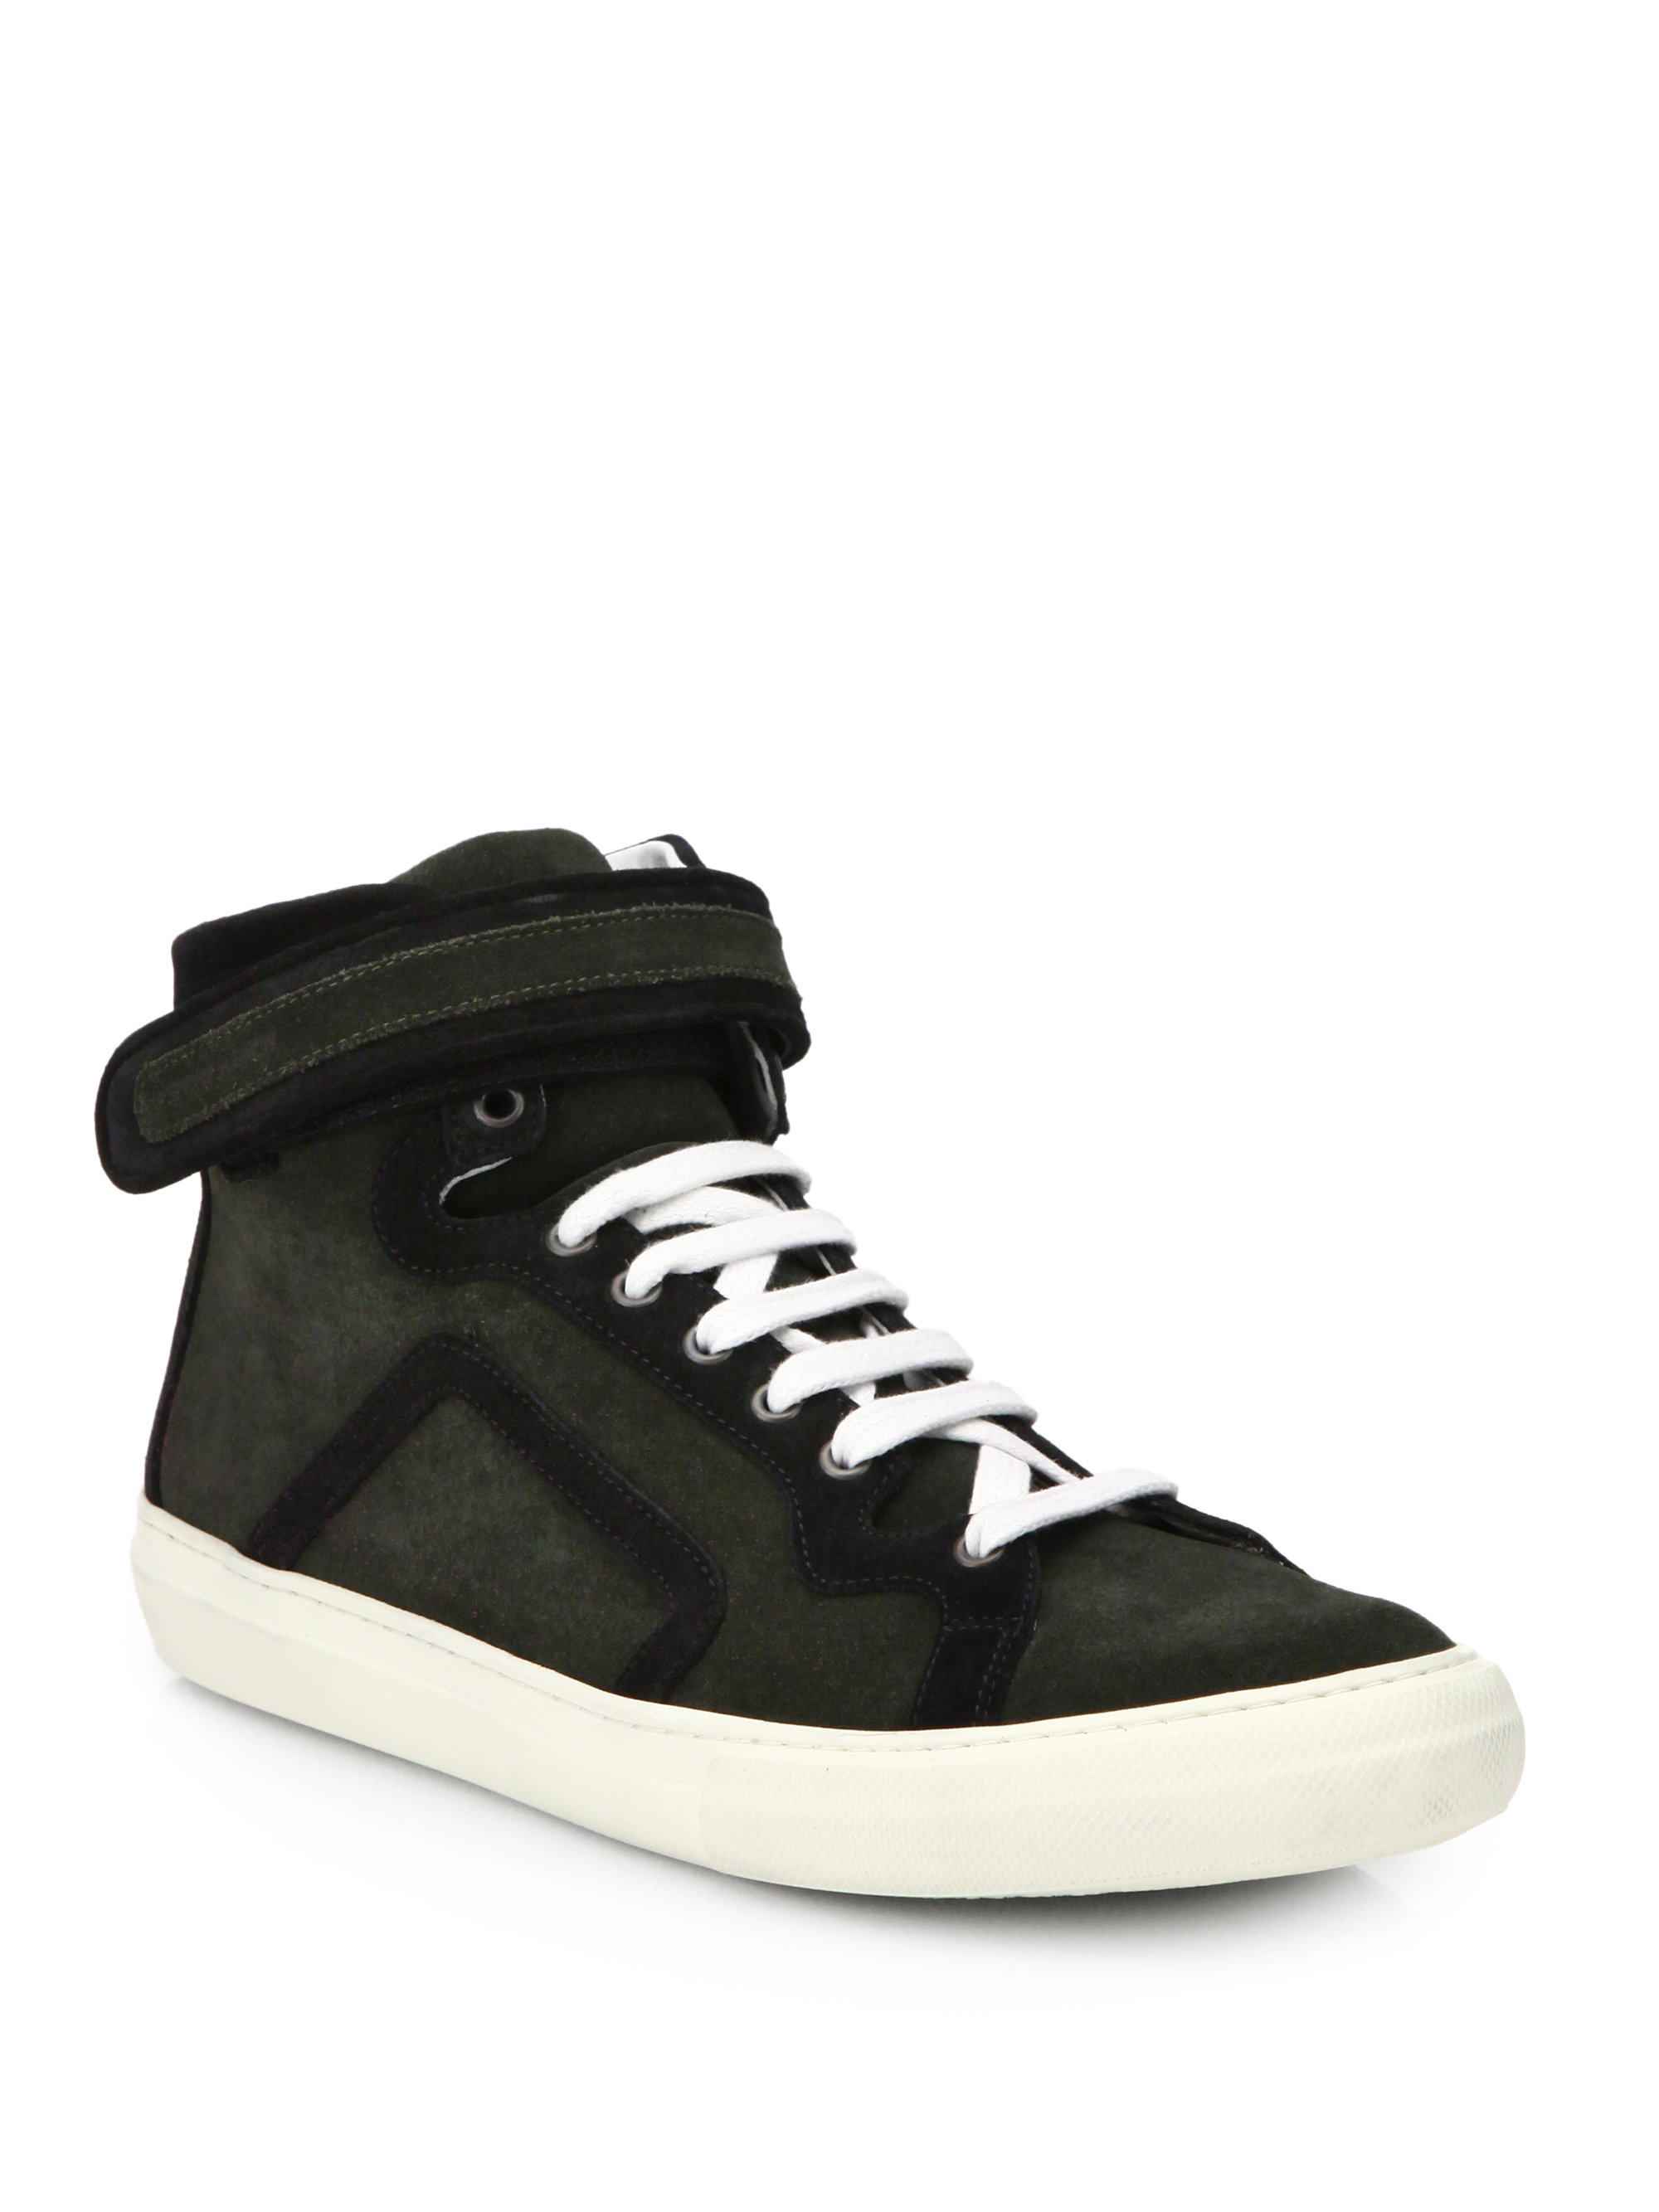 Pierre hardy Suede High-top Sneakers in Green for Men | Lyst